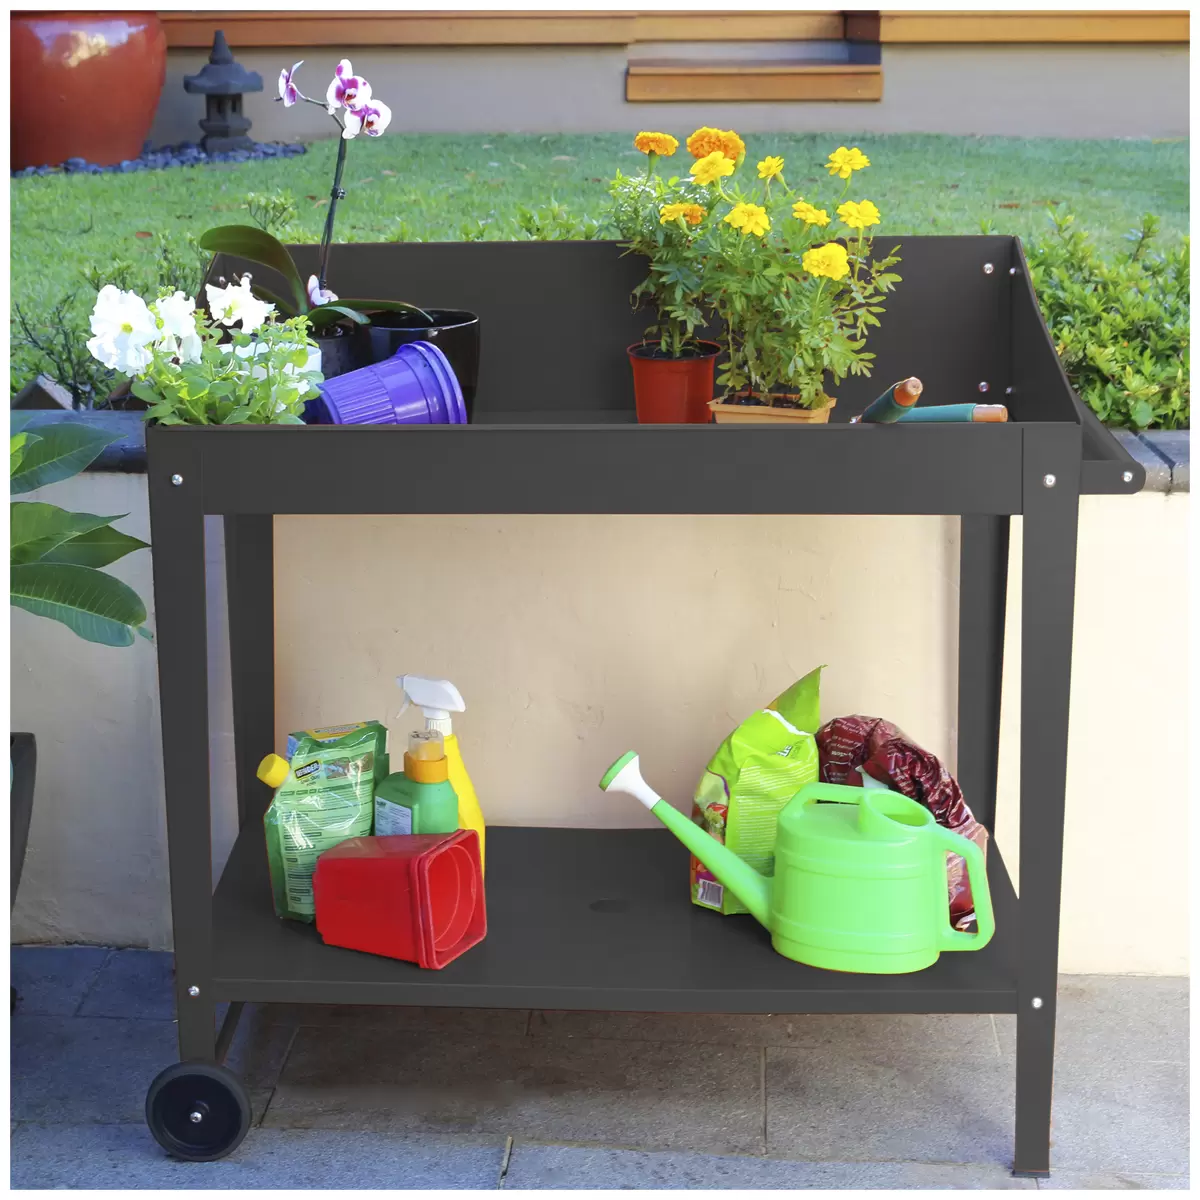 Greenlife Potting Bench Table Charcoal